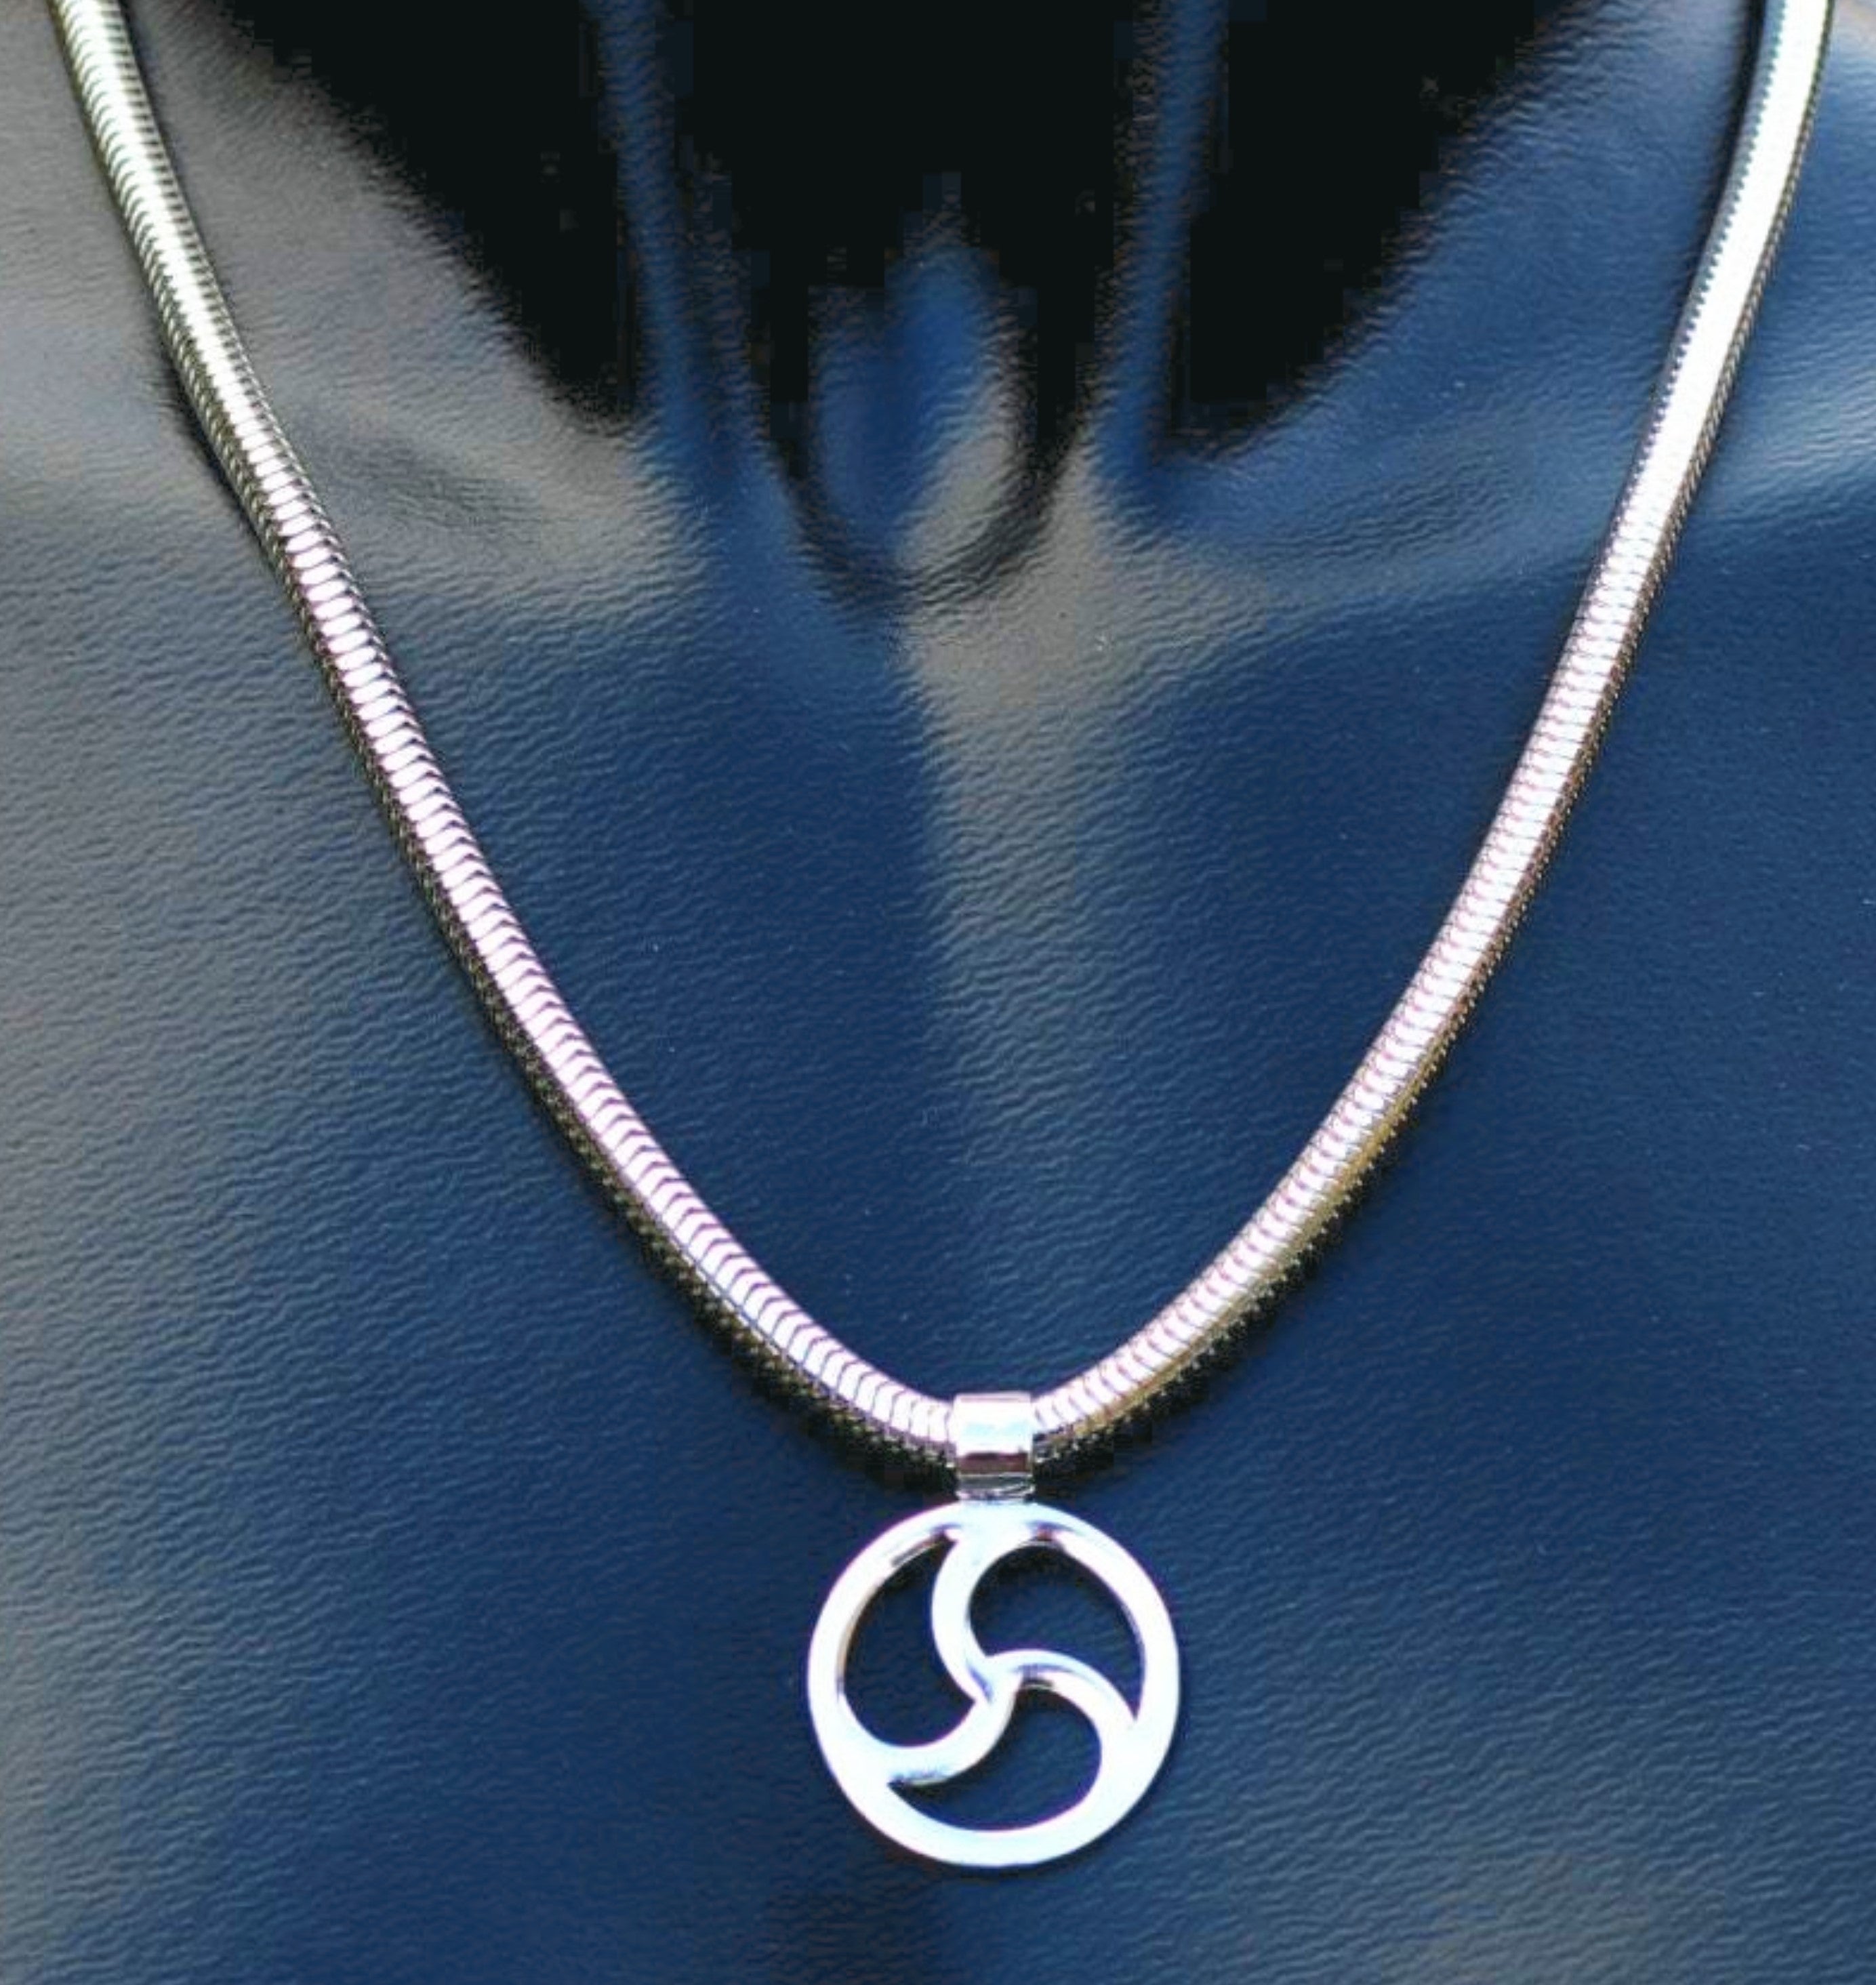 Sterling Silver, Discreet Triskele necklace, Snake Chain, Handmade BDSM Collar